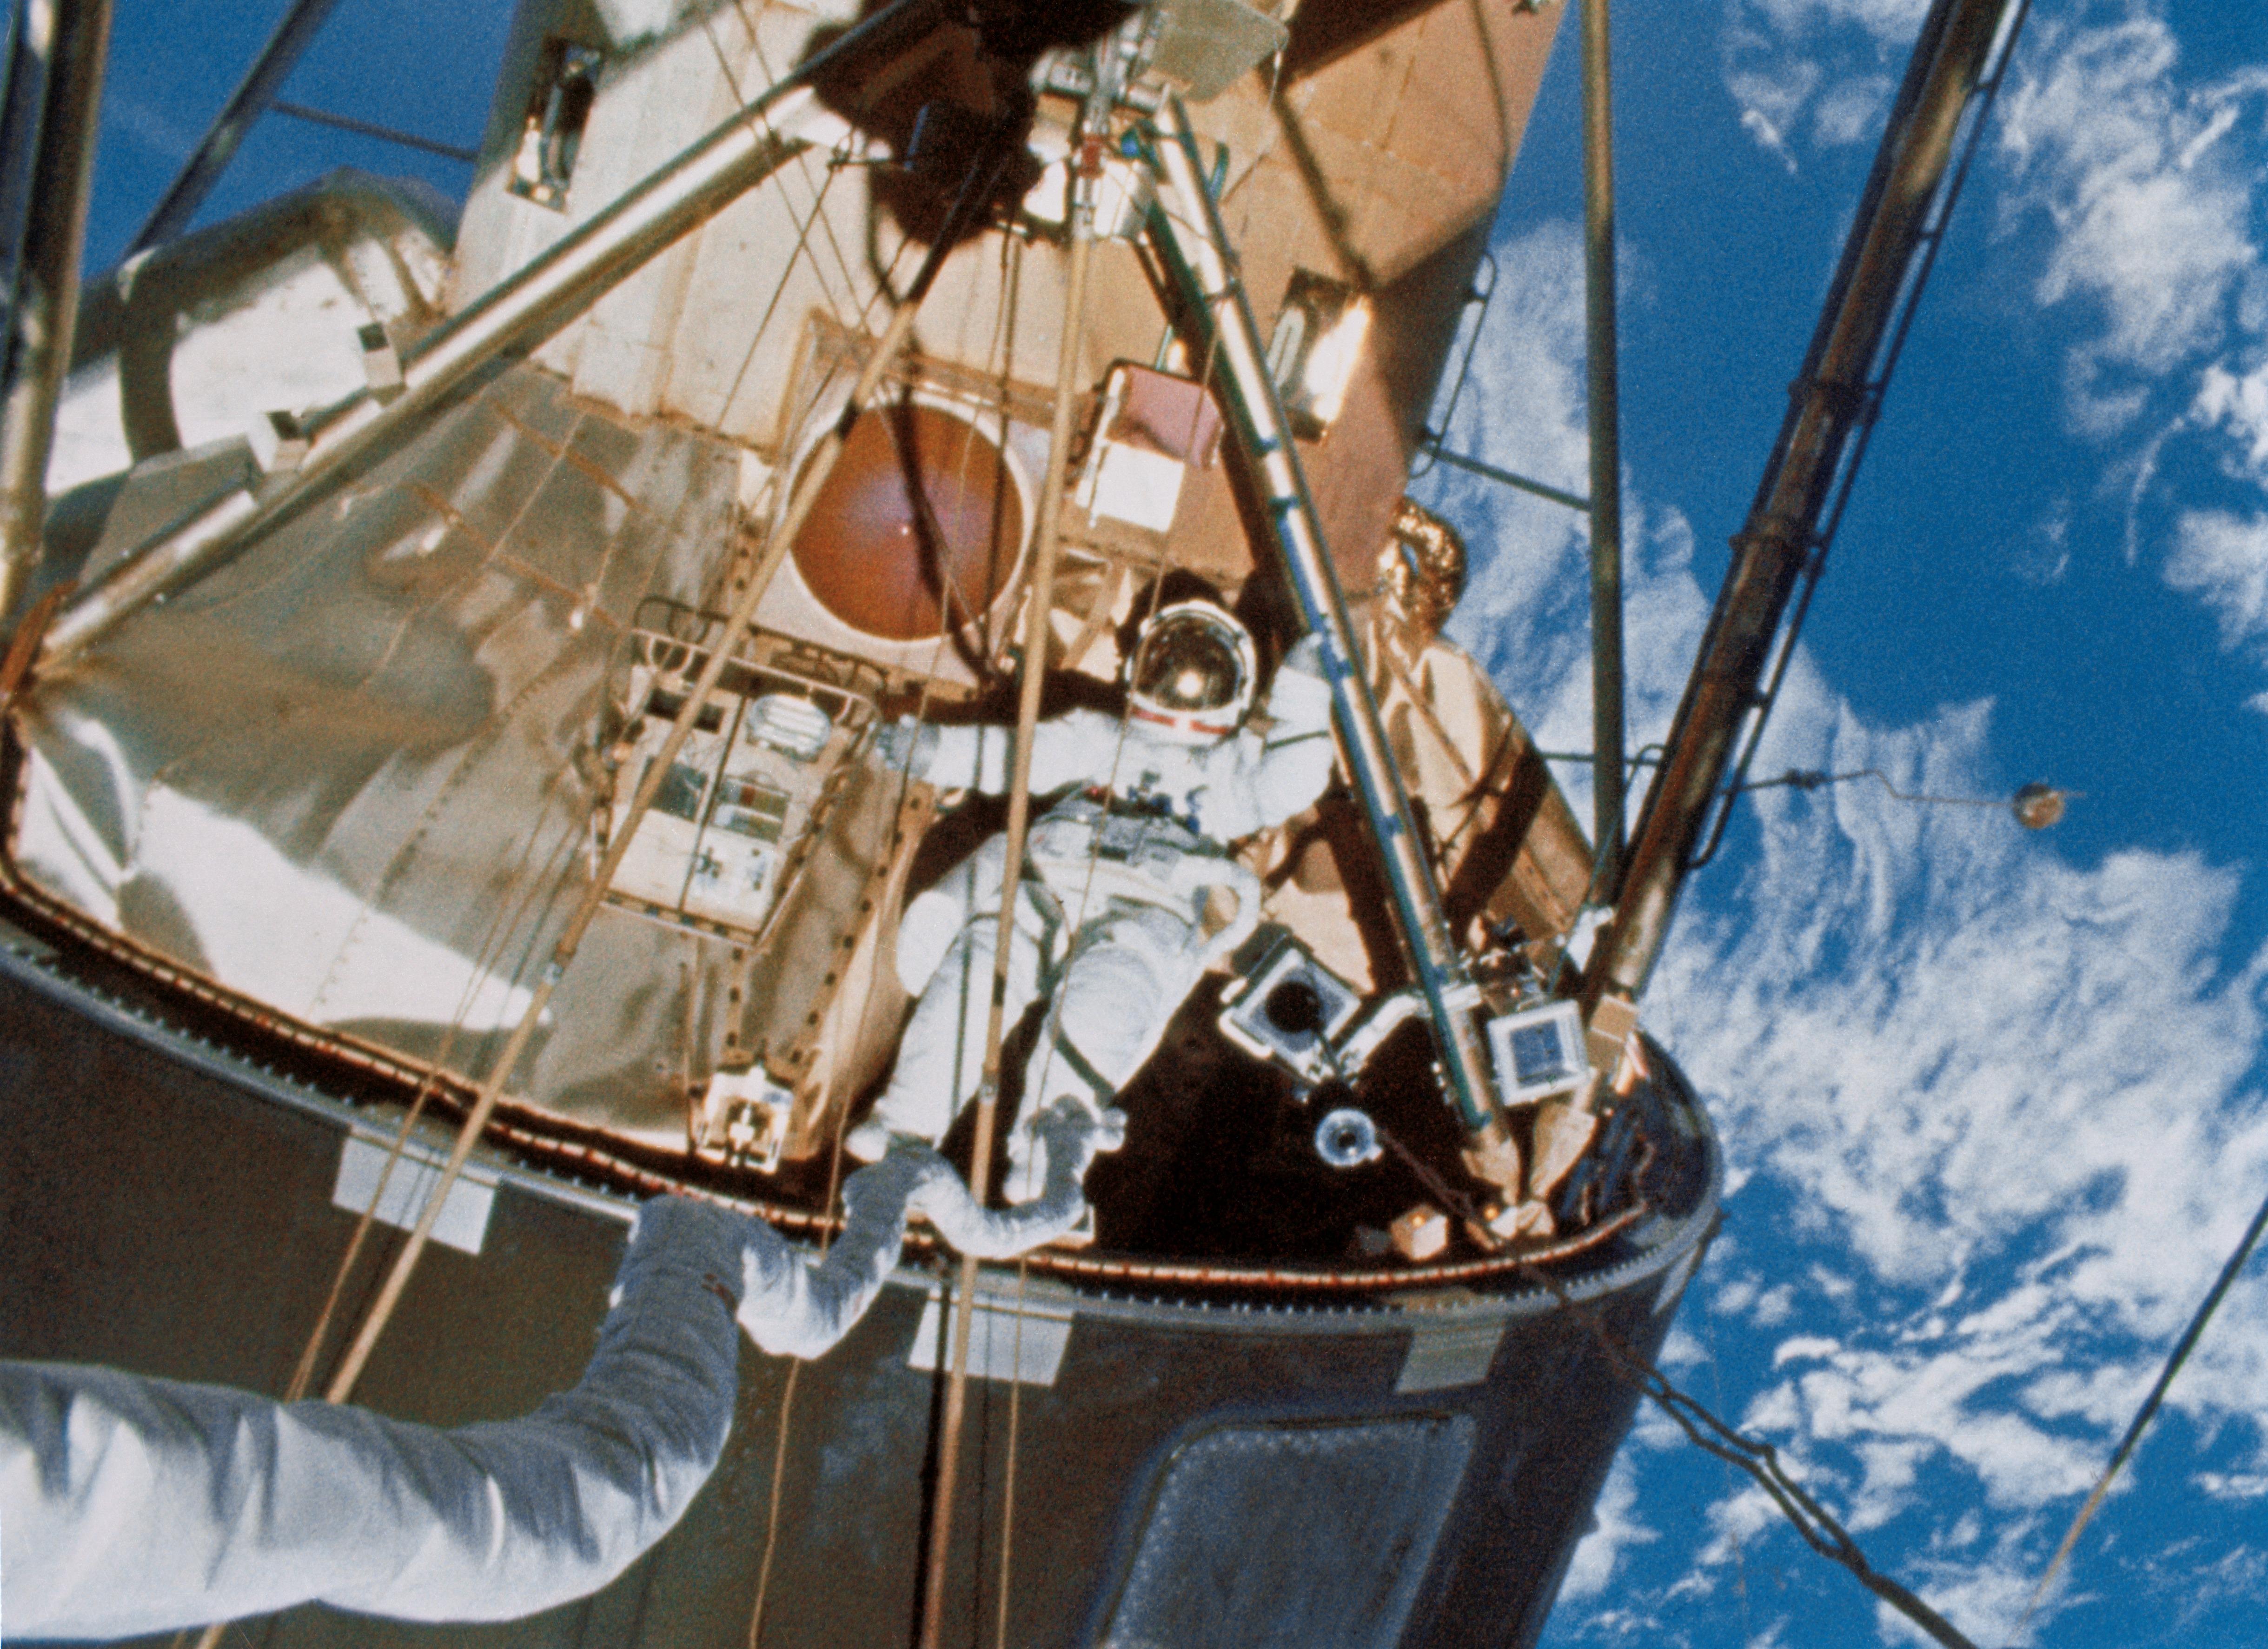 Scientist-astronaut Edward G. Gibson has just exited the Skylab extravehicular activity hatchway. Astronaut Gerald P. Carr, Skylab 4 commander, took this picture during the final Skylab spacewalk that took place on Feb. 3, 1974. Carr was above on the Apollo Telescope Mount when he shot this frame of Gibson. Note Carr's umbilical/tether line extending from inside the space station up toward the camera. Astronaut William R. Pogue, Skylab 4 pilot, remained inside the space station during the spacewalk by Carr and Gibson. Credit: NASA.